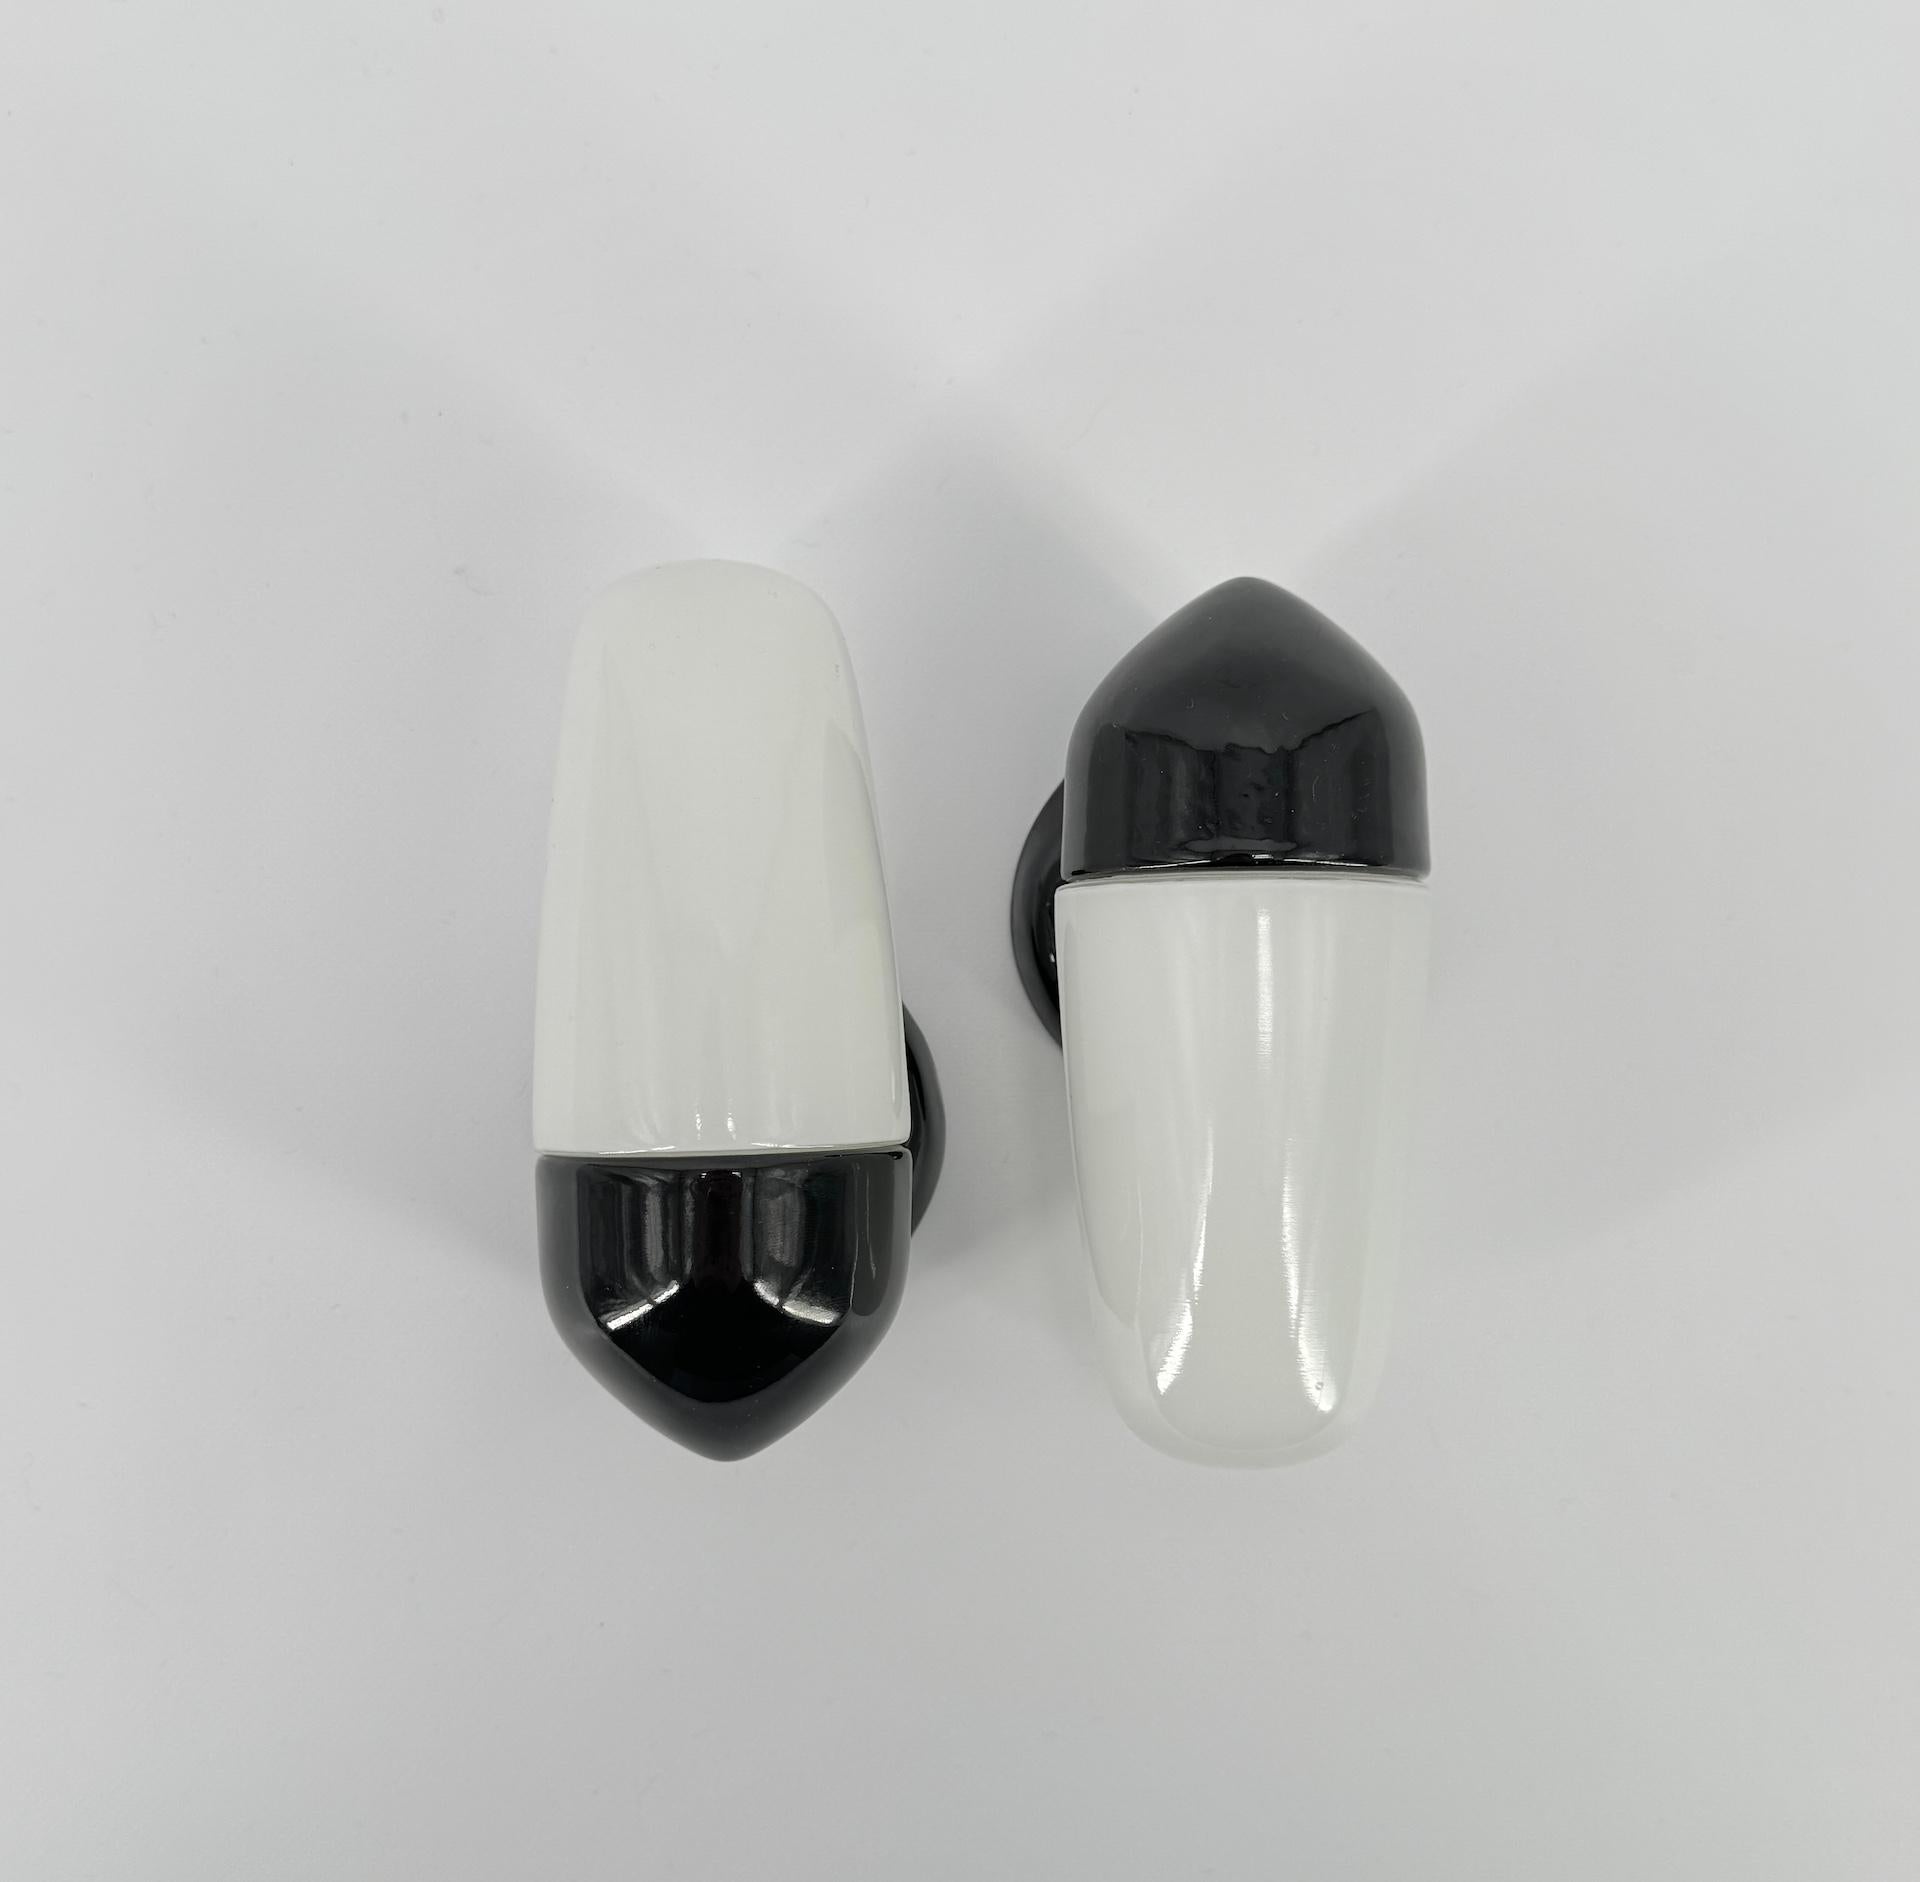 Wall light in black porcelain and opaline glass shades were designed by the German designer Wilhelm Wagenfeld, who studied at the Bauhaus school. 

This model dates from 1958 with sleek, round and elegant lines, a timeless design that will look